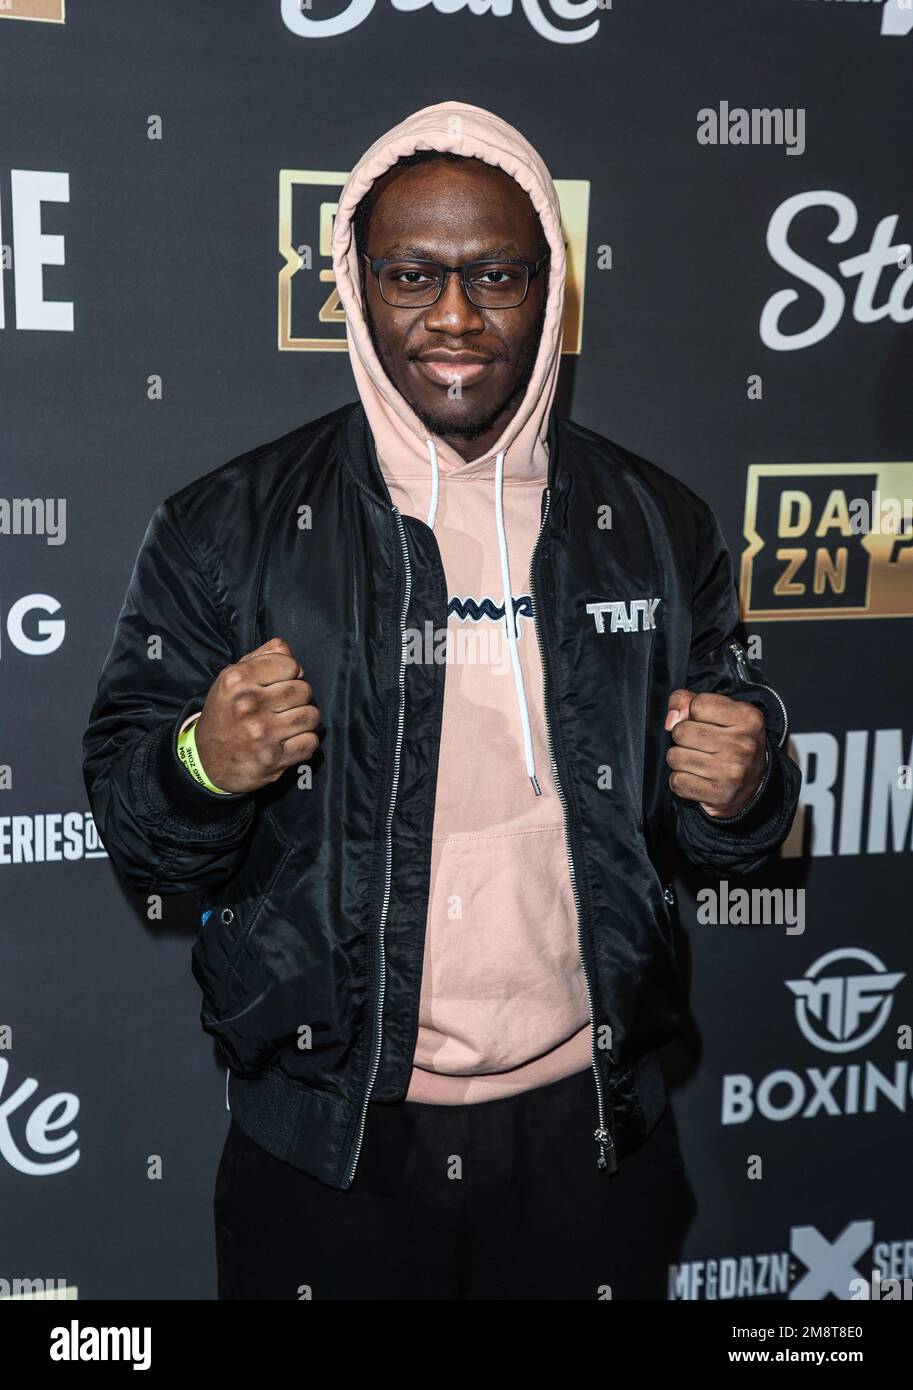 Deji boxing hi-res stock photography and images